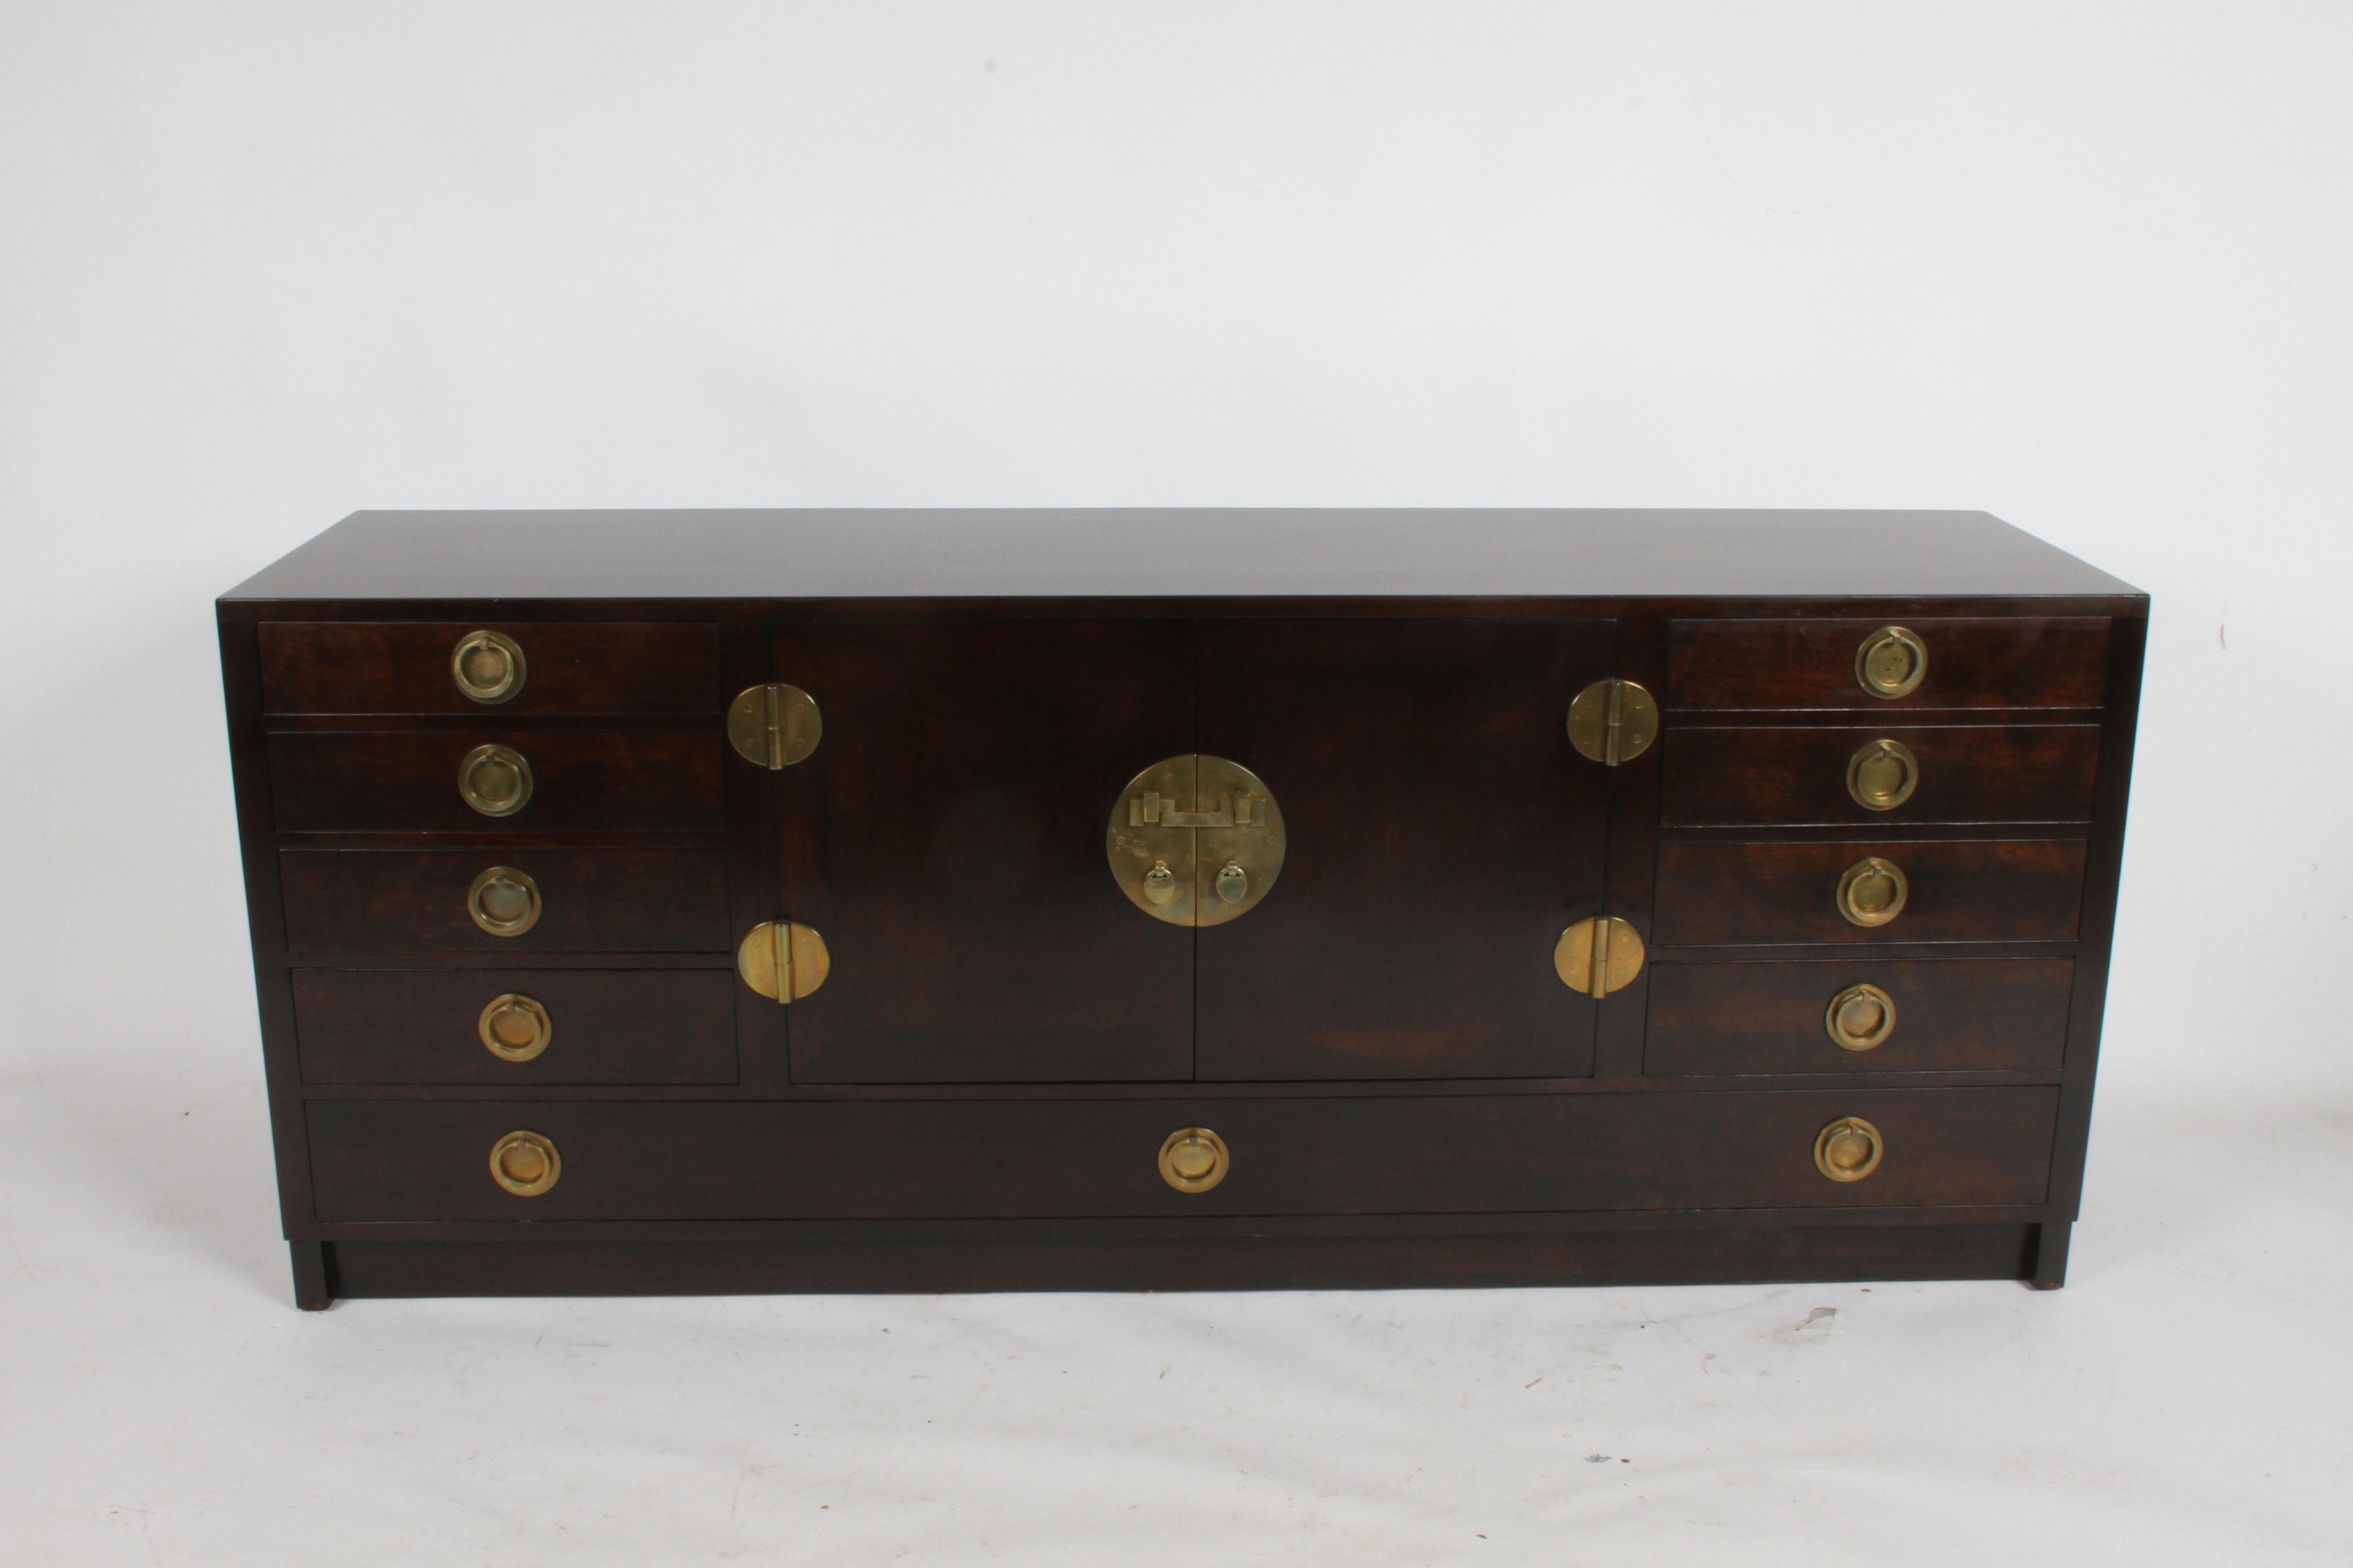 Mid-Century Modern Edward J. Wormley for Dunbar Asian inspired sideboard model # 4579. Mahogany with original dark finish that has been restored, has impressive heavy brass hardware that was imported by Dunbar for authenticity, as noted in Dunbar